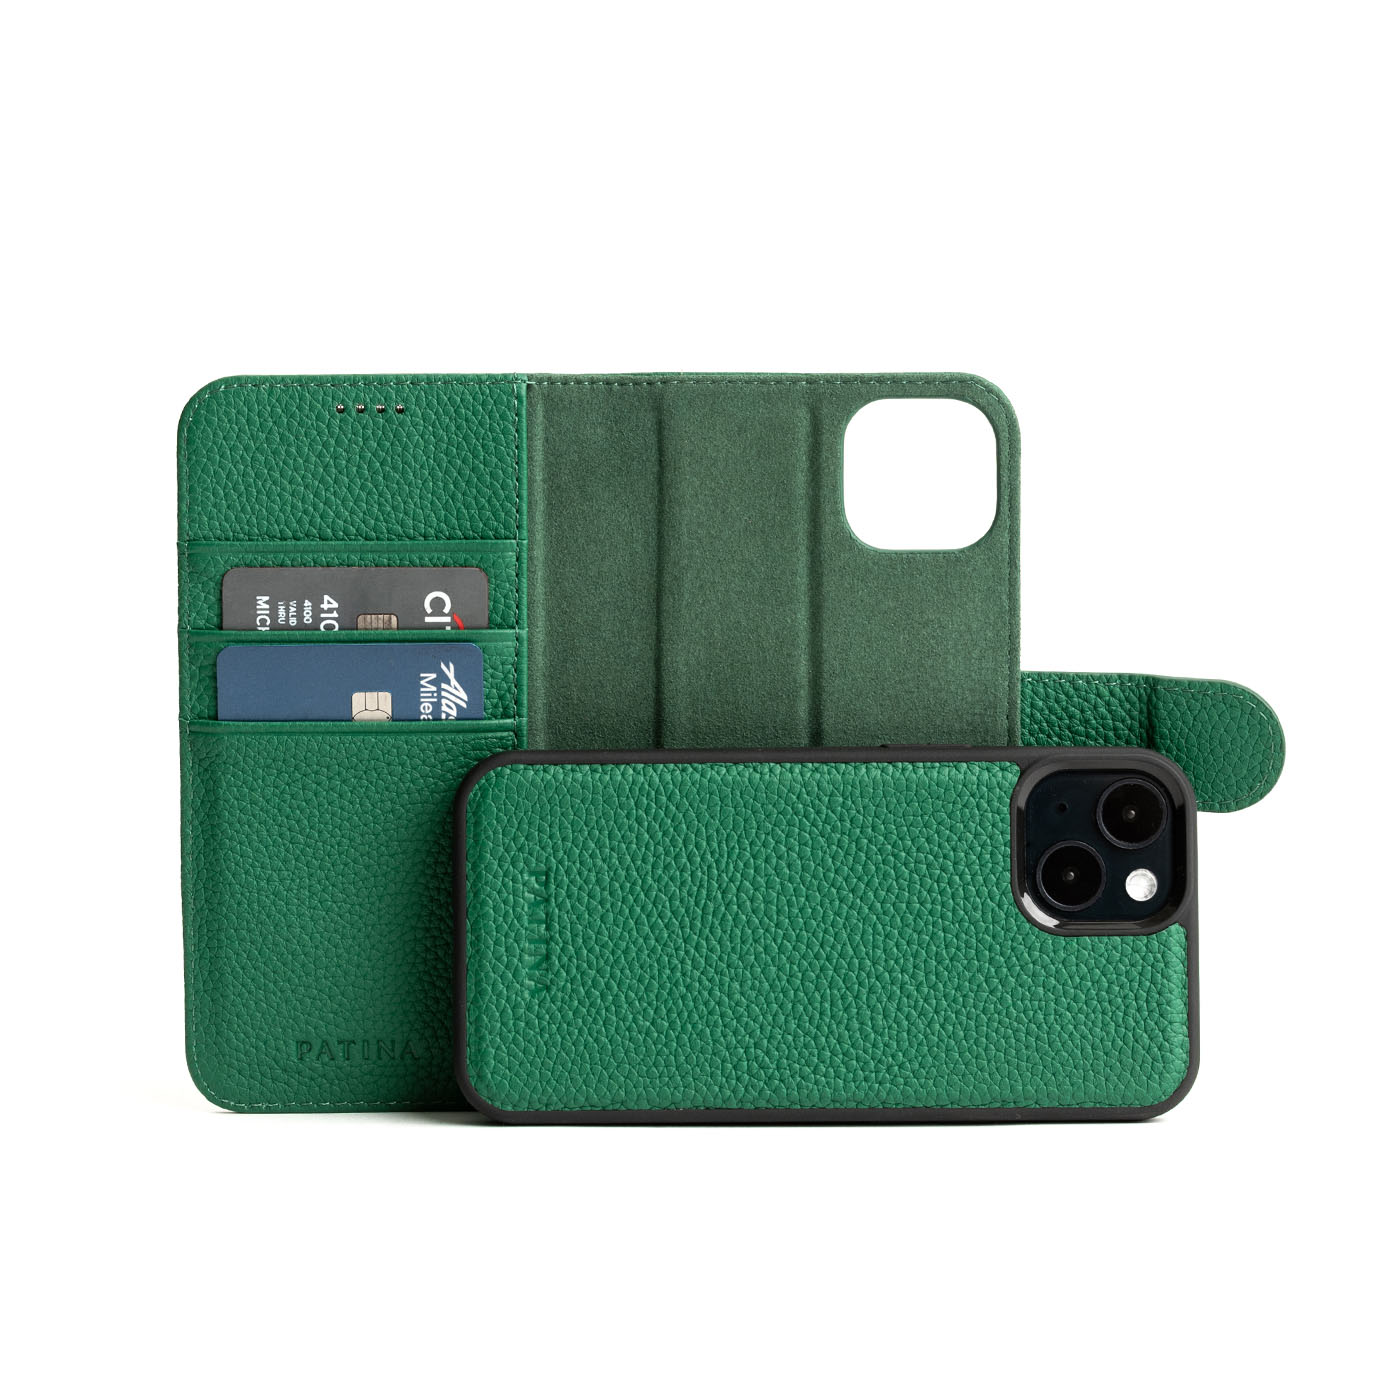 iPhone 13 Pro Max Leather Case - with Detachable Wallet